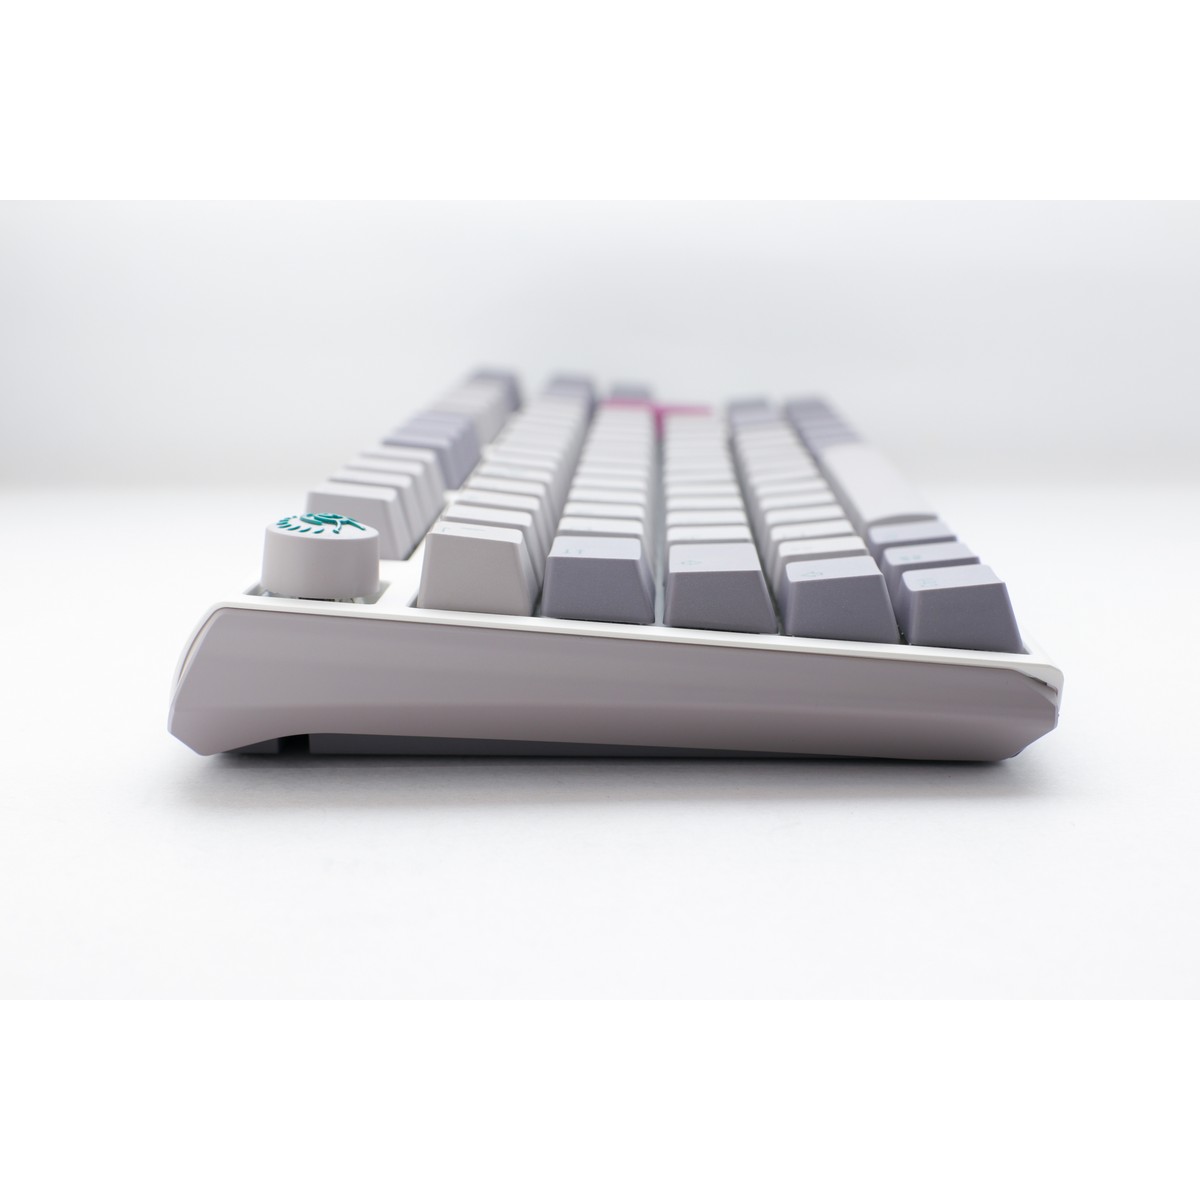 Ducky - Ducky One 3 Mist TKL 80% USB RGB Mechanical Gaming Keyboard Cherry MX Silent Red Switch - UK Layout